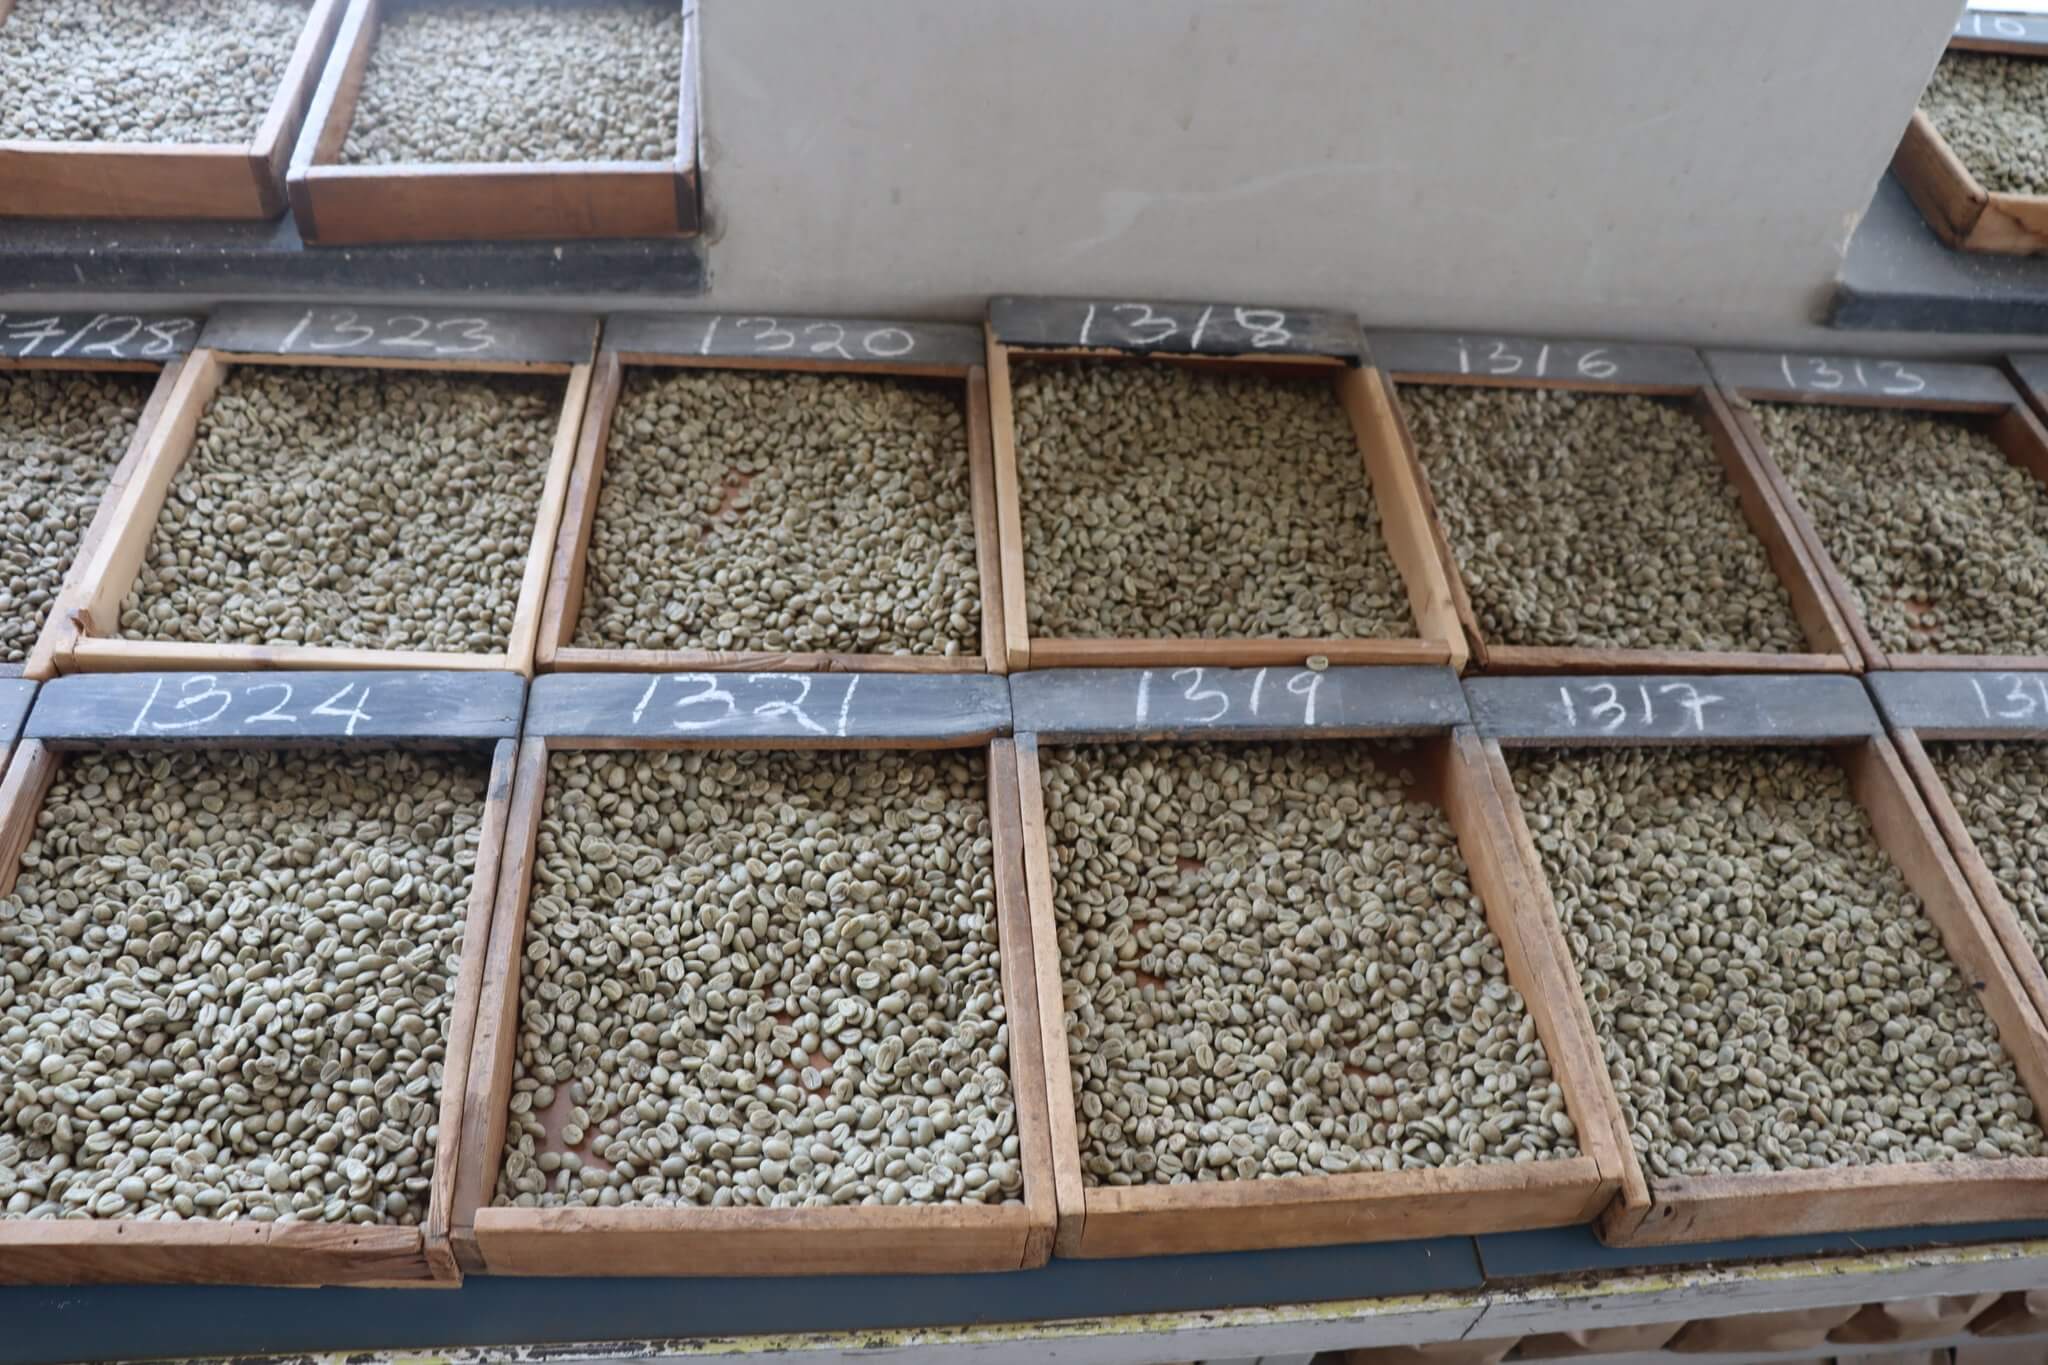 Kenya’s Coffee Prices Take a Hit, Dipping 8% Due to Top-Grade Decline